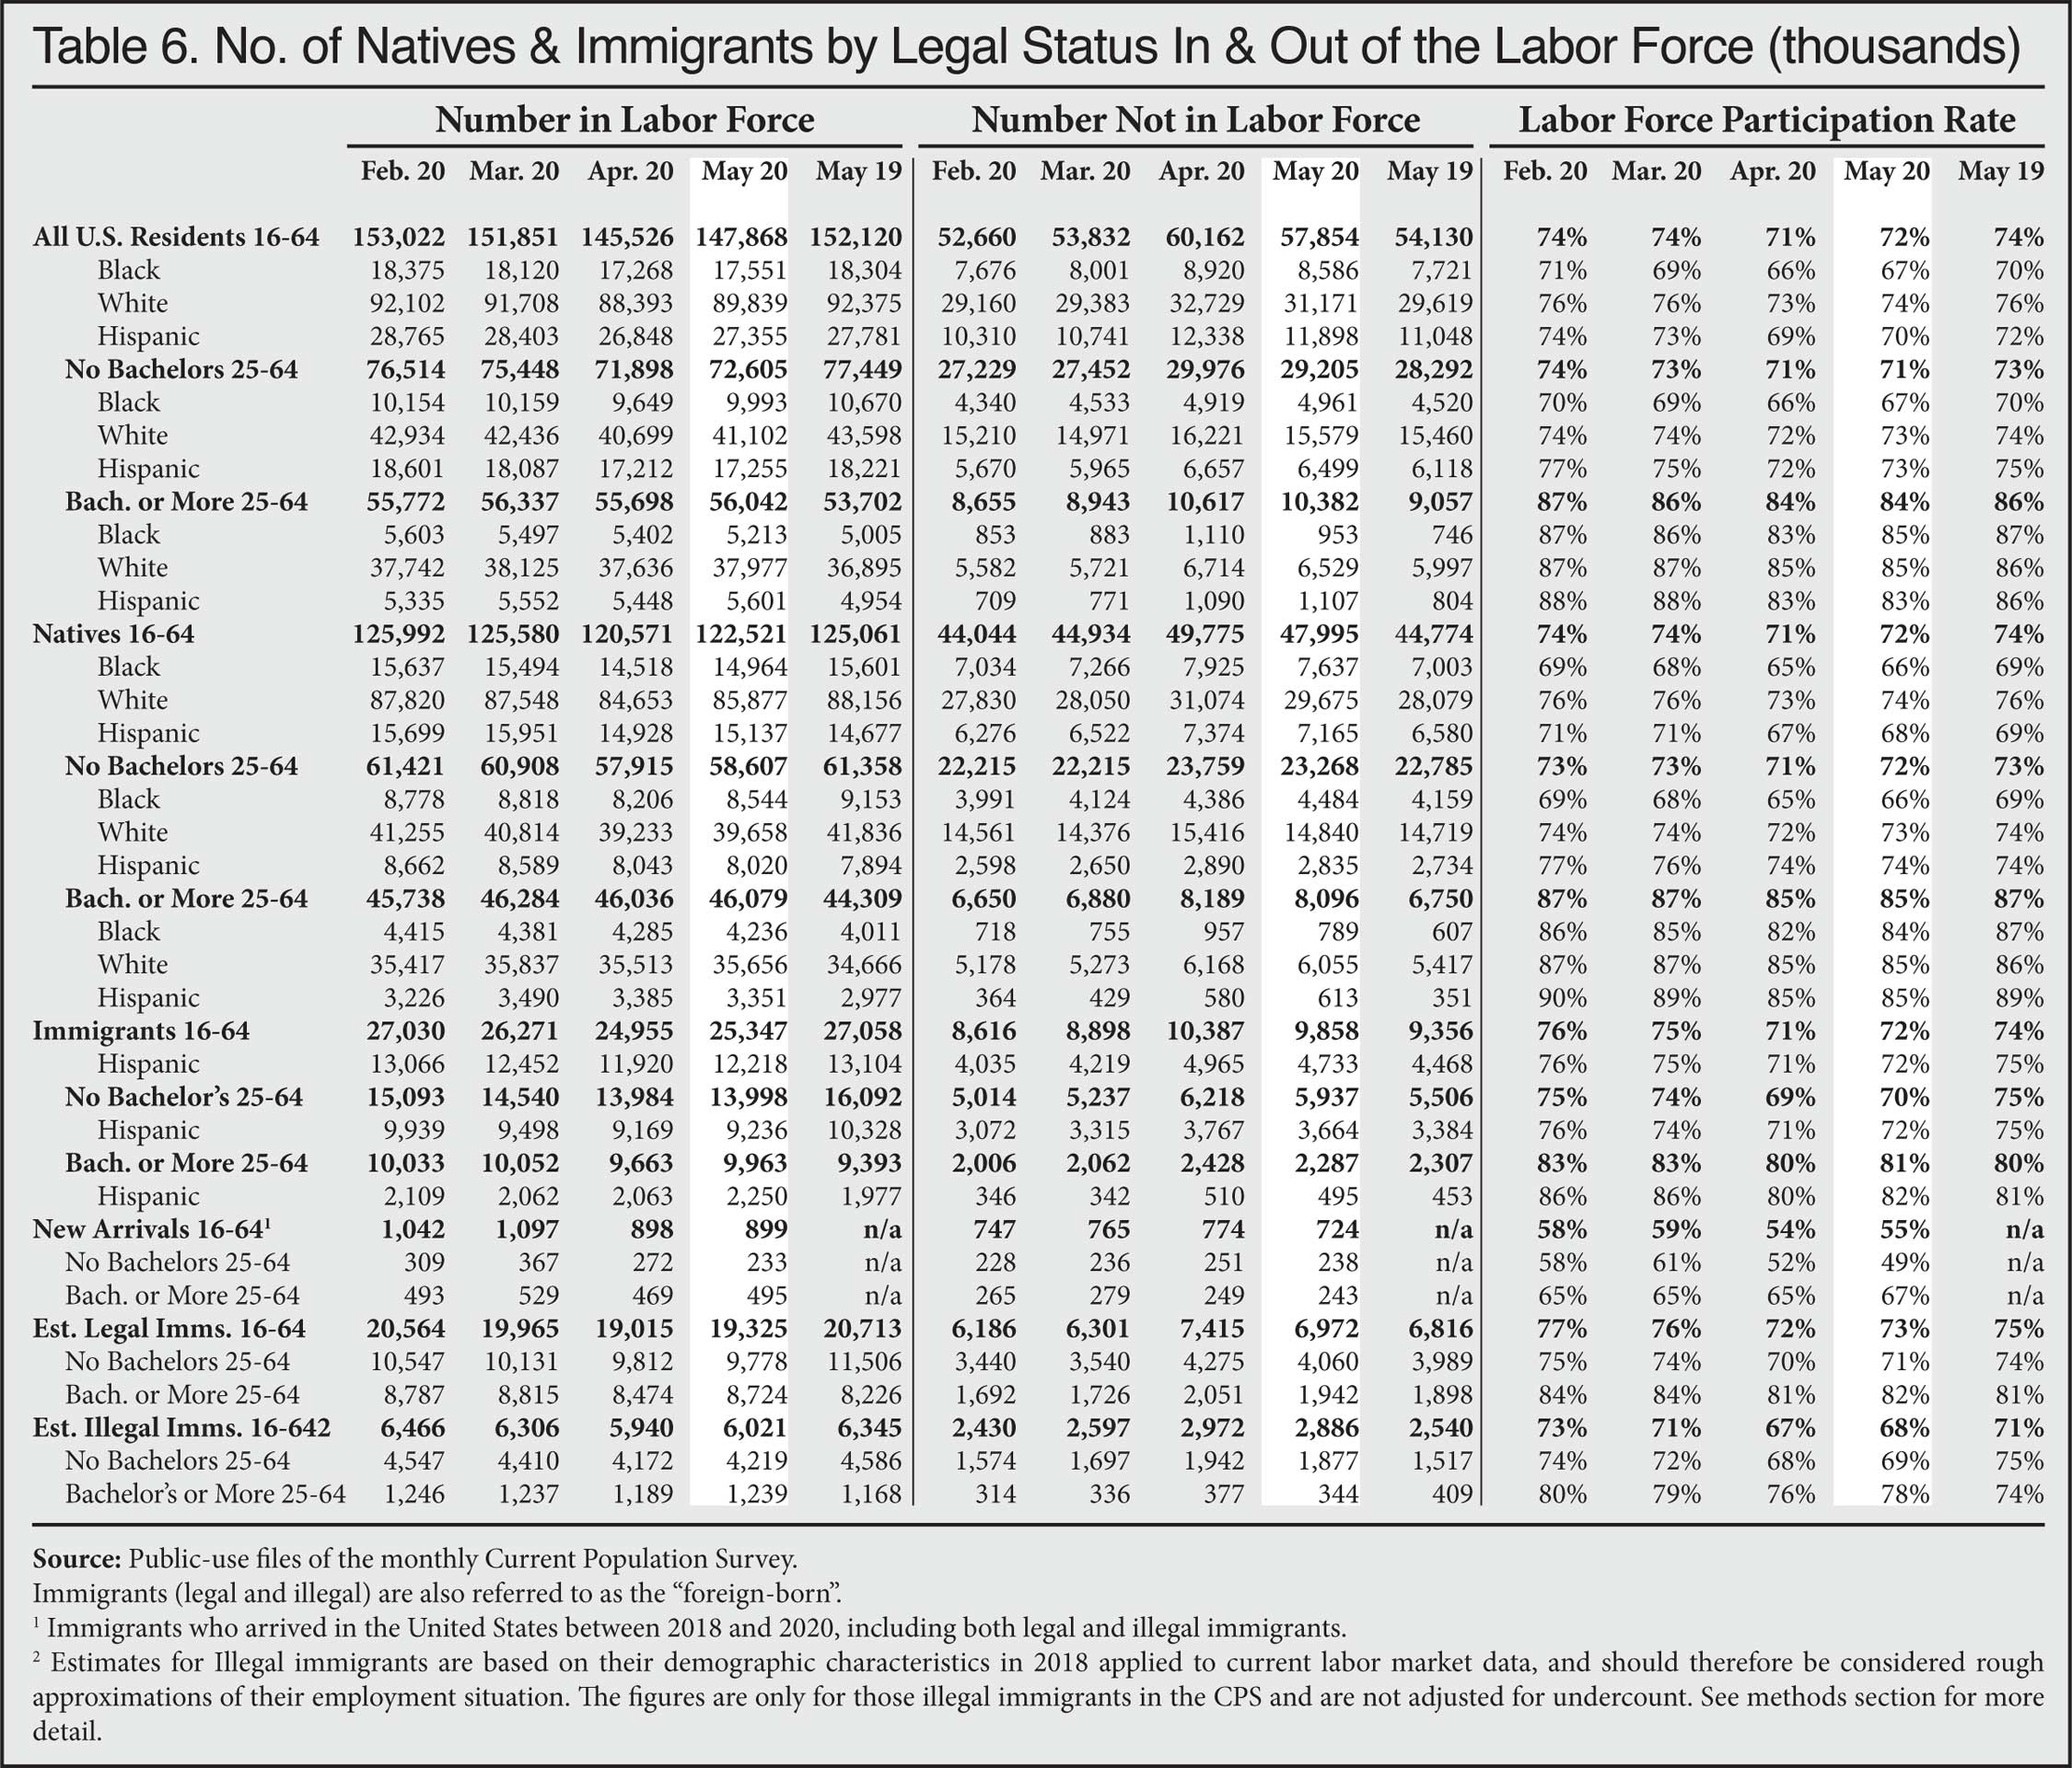 Table: Number of Natives and Immigrants by Legal Status in and Out of the Labor Force, 2020